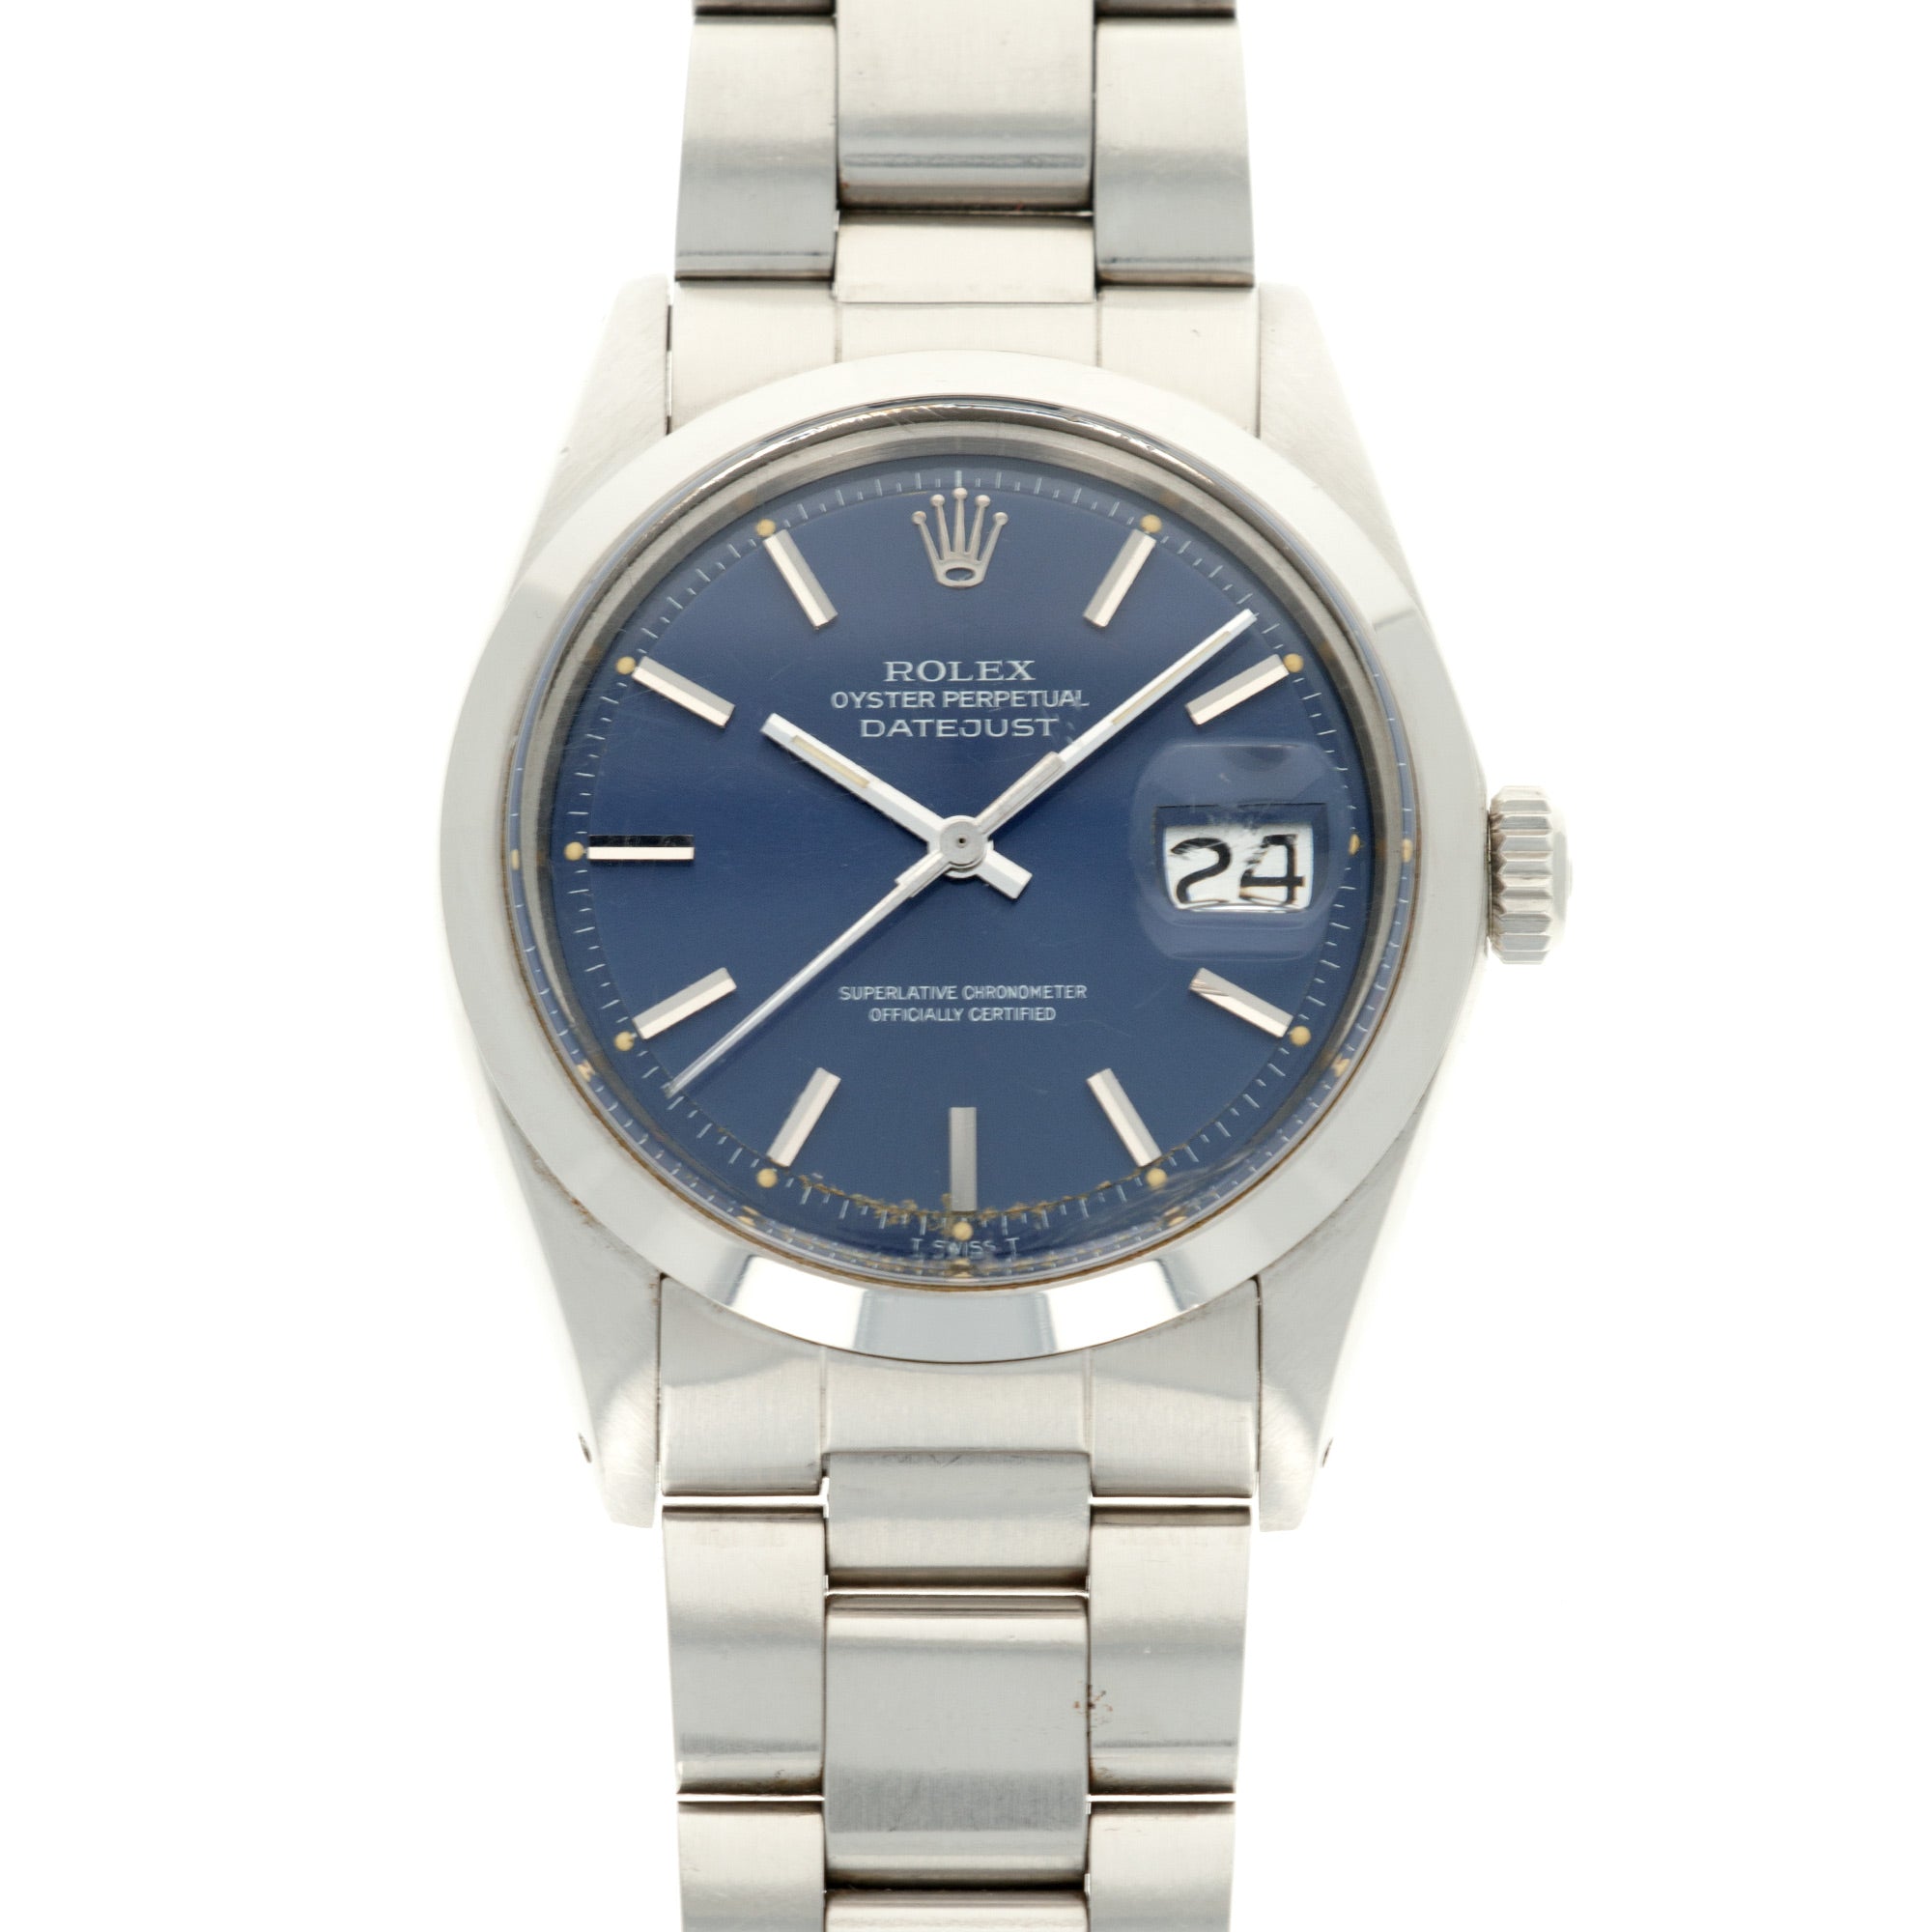 Rolex - Rolex Steel Datejust Ref. 1600 with Blue Dial - The Keystone Watches